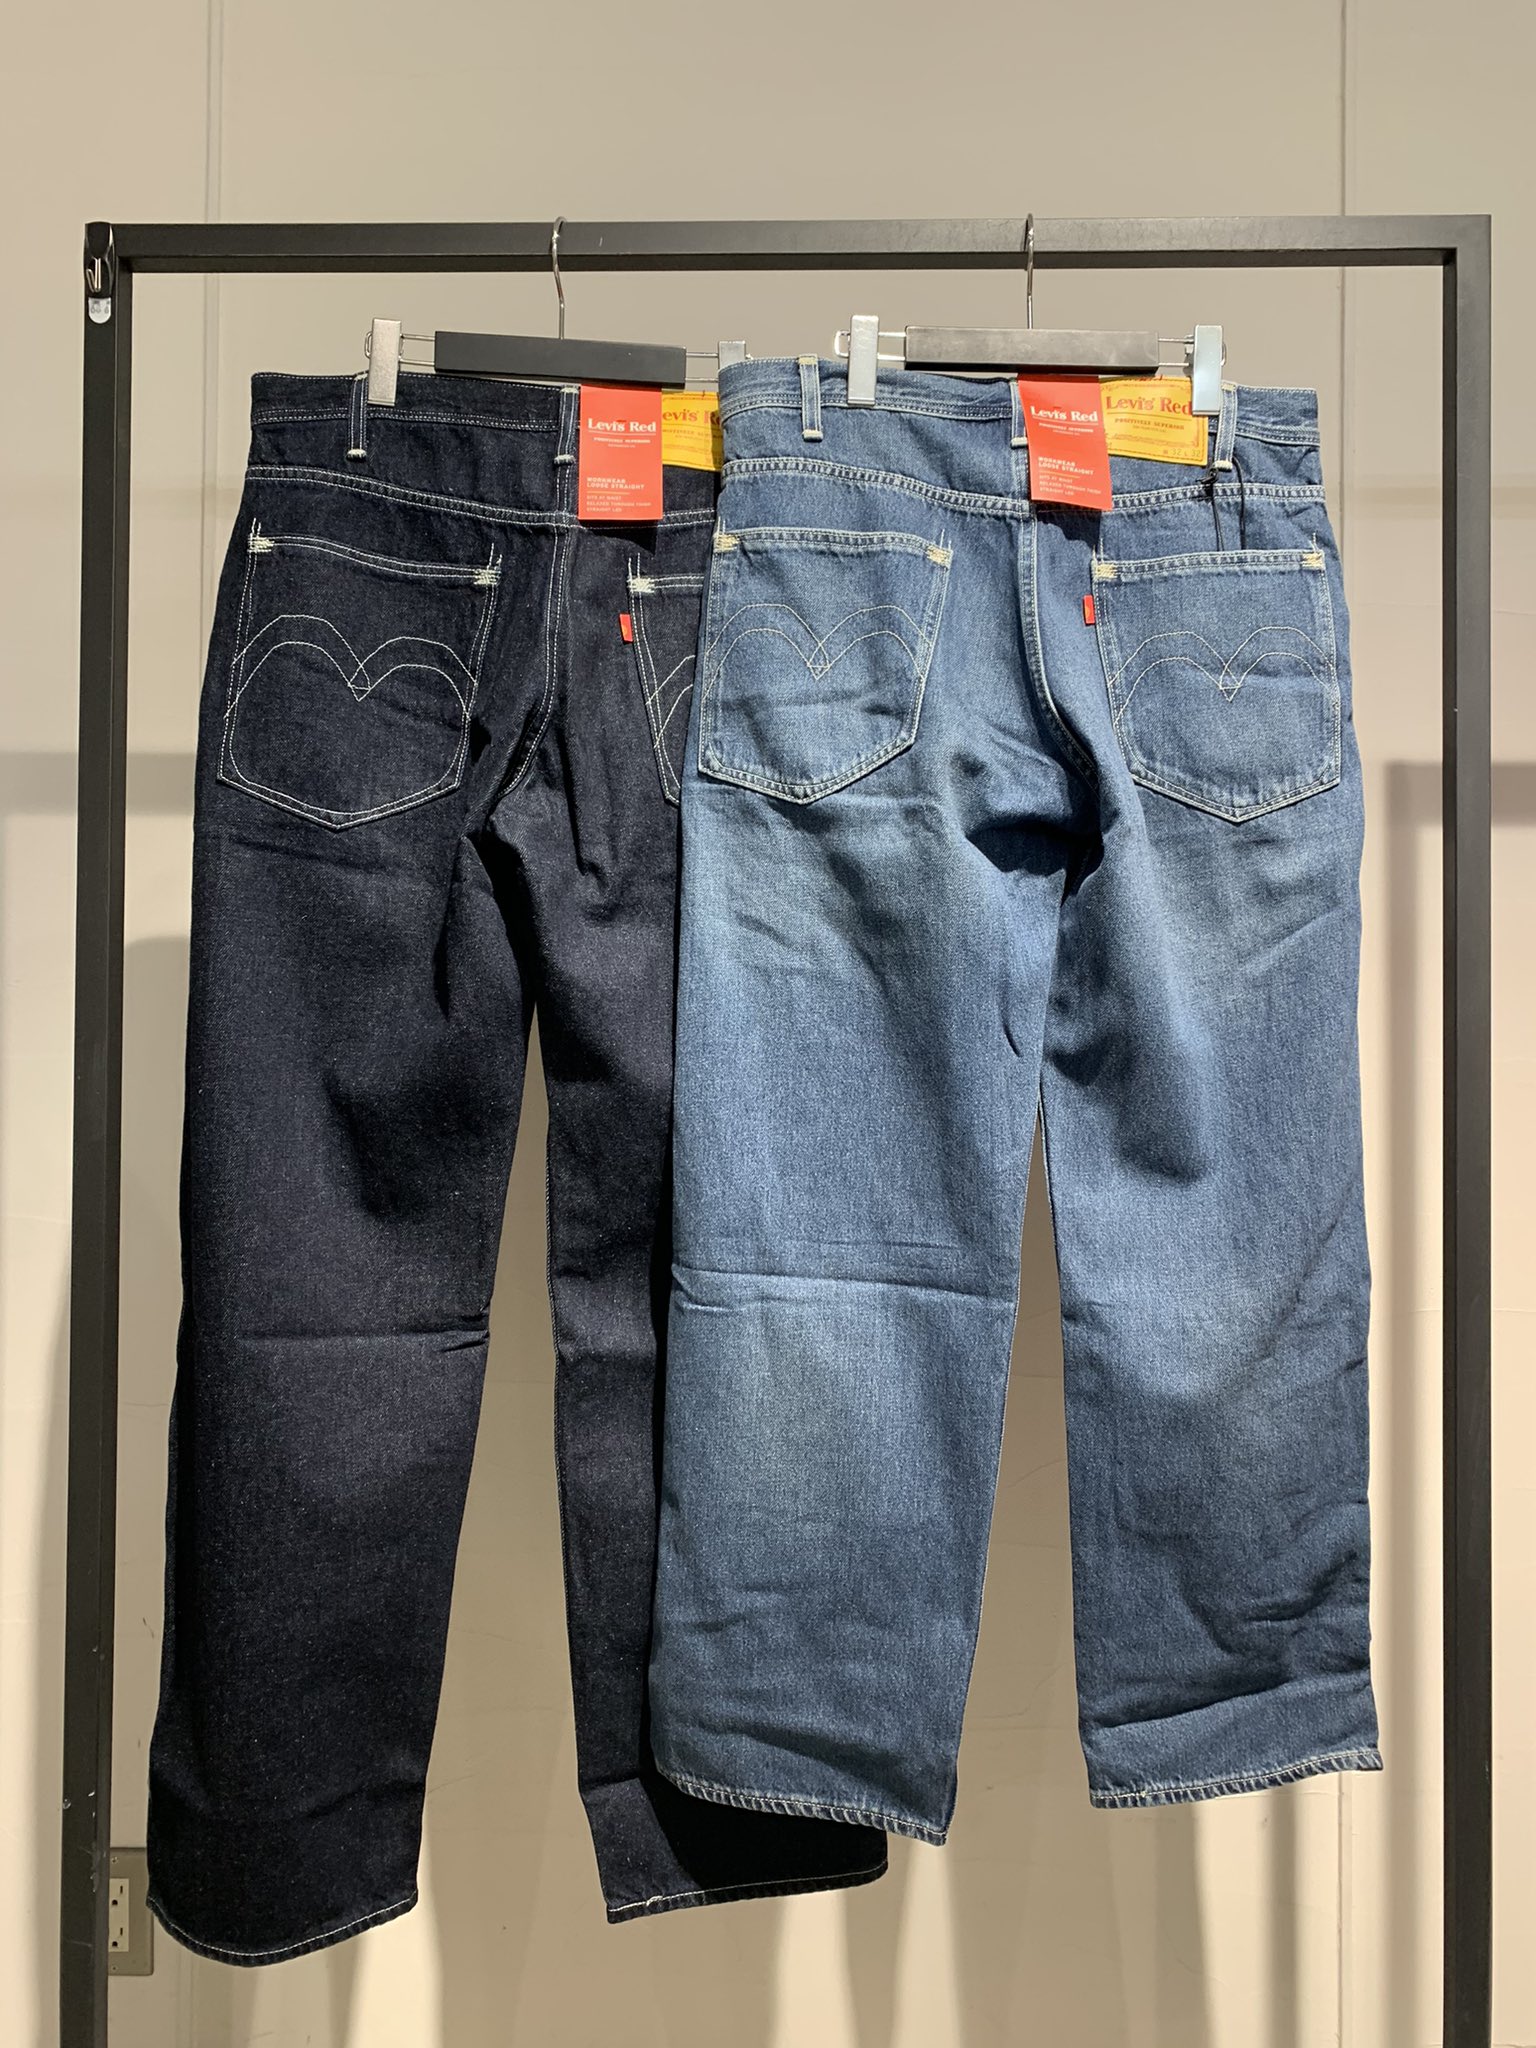 Lhp Ikebukuro Levi S Red New rival Workwear Loose Straight Price 22 000 Tax Size 30 32 Color Indigo Indigo Lhp Lhp池袋 Levisred Levis リーバイスレッド リーバイス T Co 6sn5akzg4y Twitter